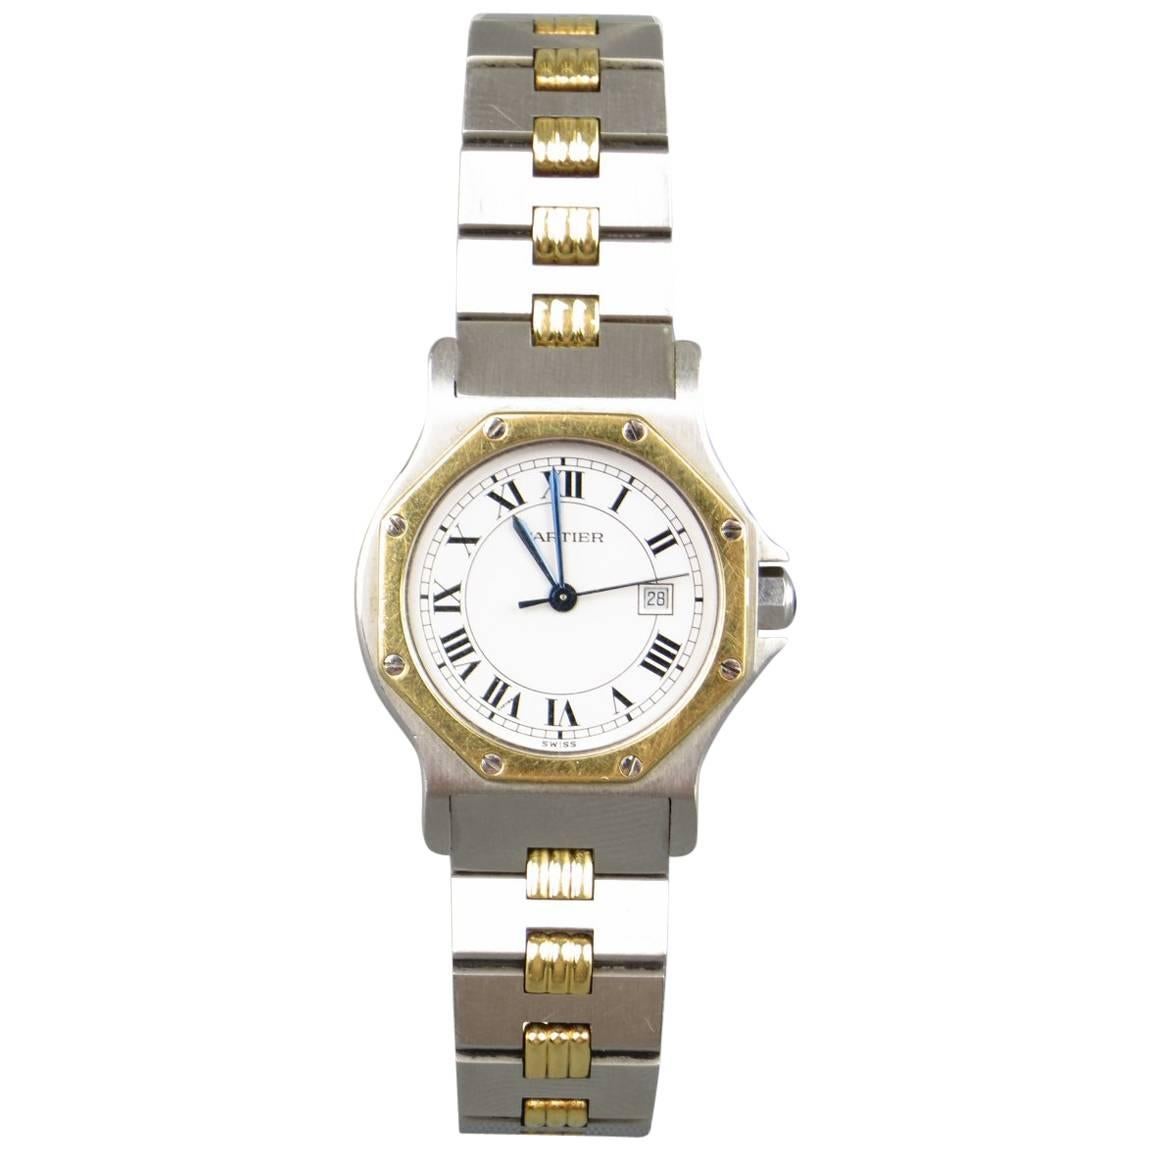 Vintage CARTIER Watch Silver Stainless Steel & 18k Gold - Retails at $5, 800.00